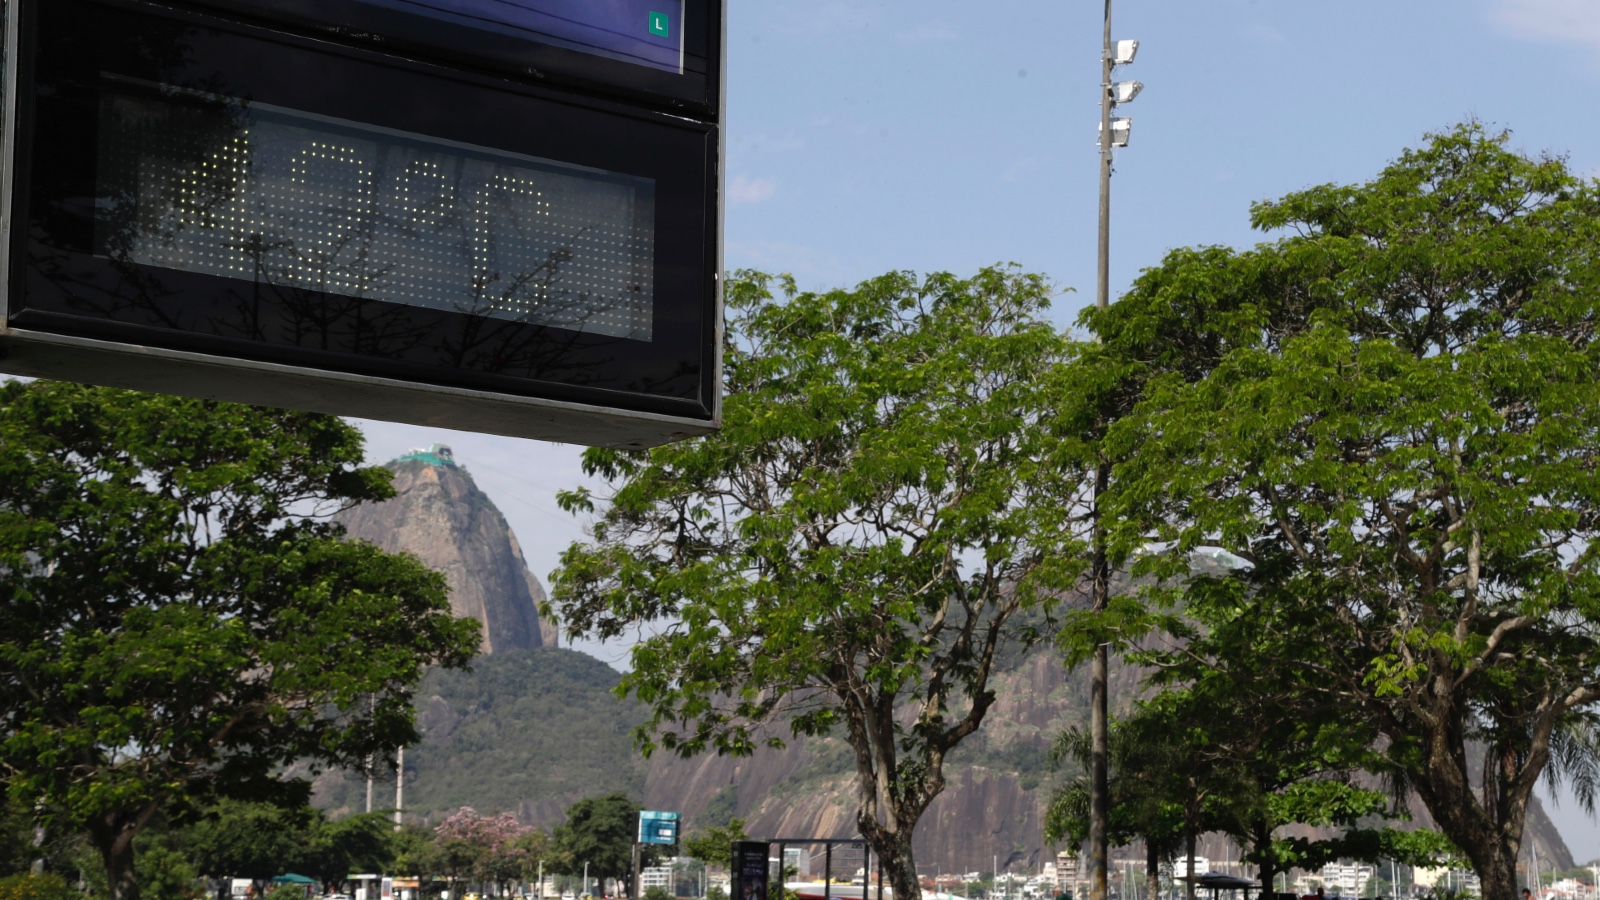 A thermometer reads 42 degrees Celsius during a rare winter heat wave in Brazil.